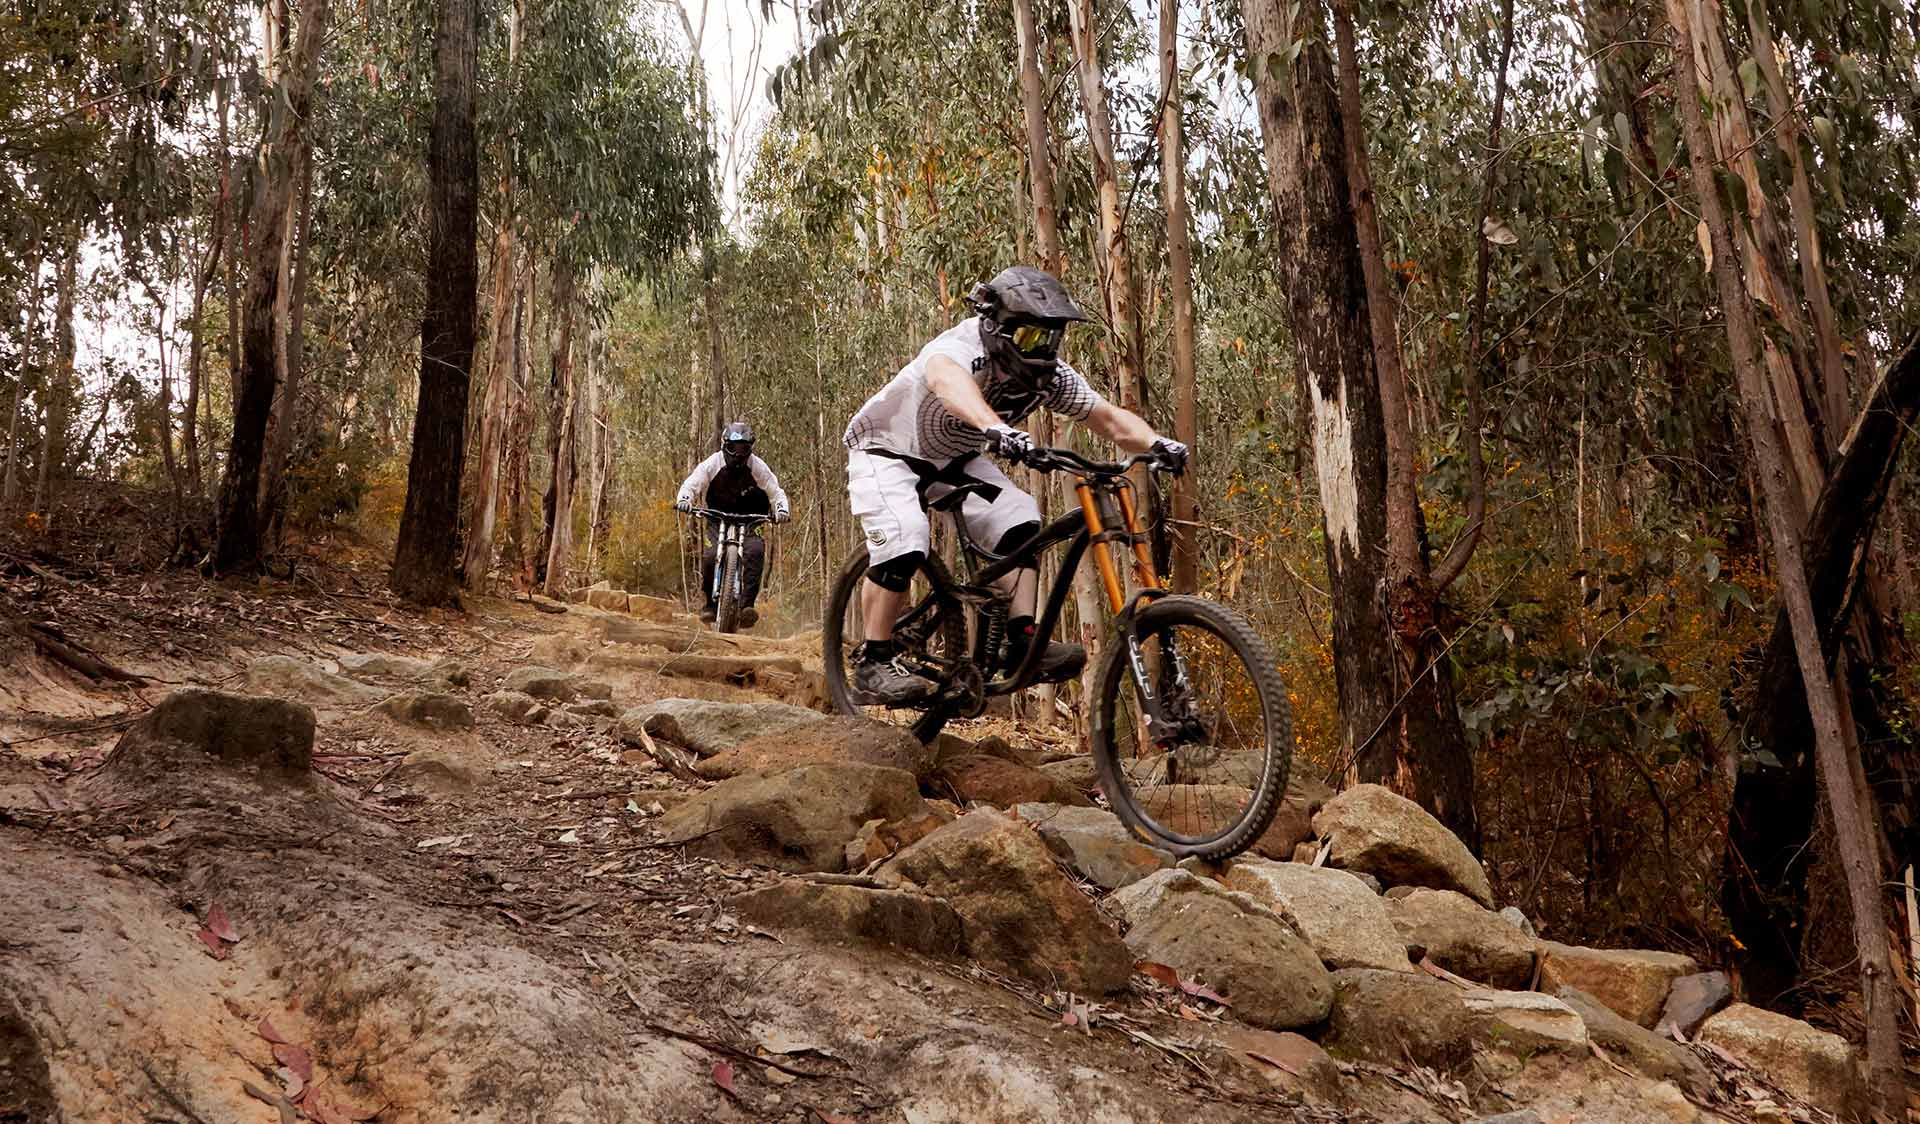 https://www.parks.vic.gov.au/-/media/project/pv/main/parks/images/places-to-see/kinglake-national-park/3-mtb-kinglake-national-park-1920x1124.jpg?rev=5a701cec6c034c22a834aac967545fd4